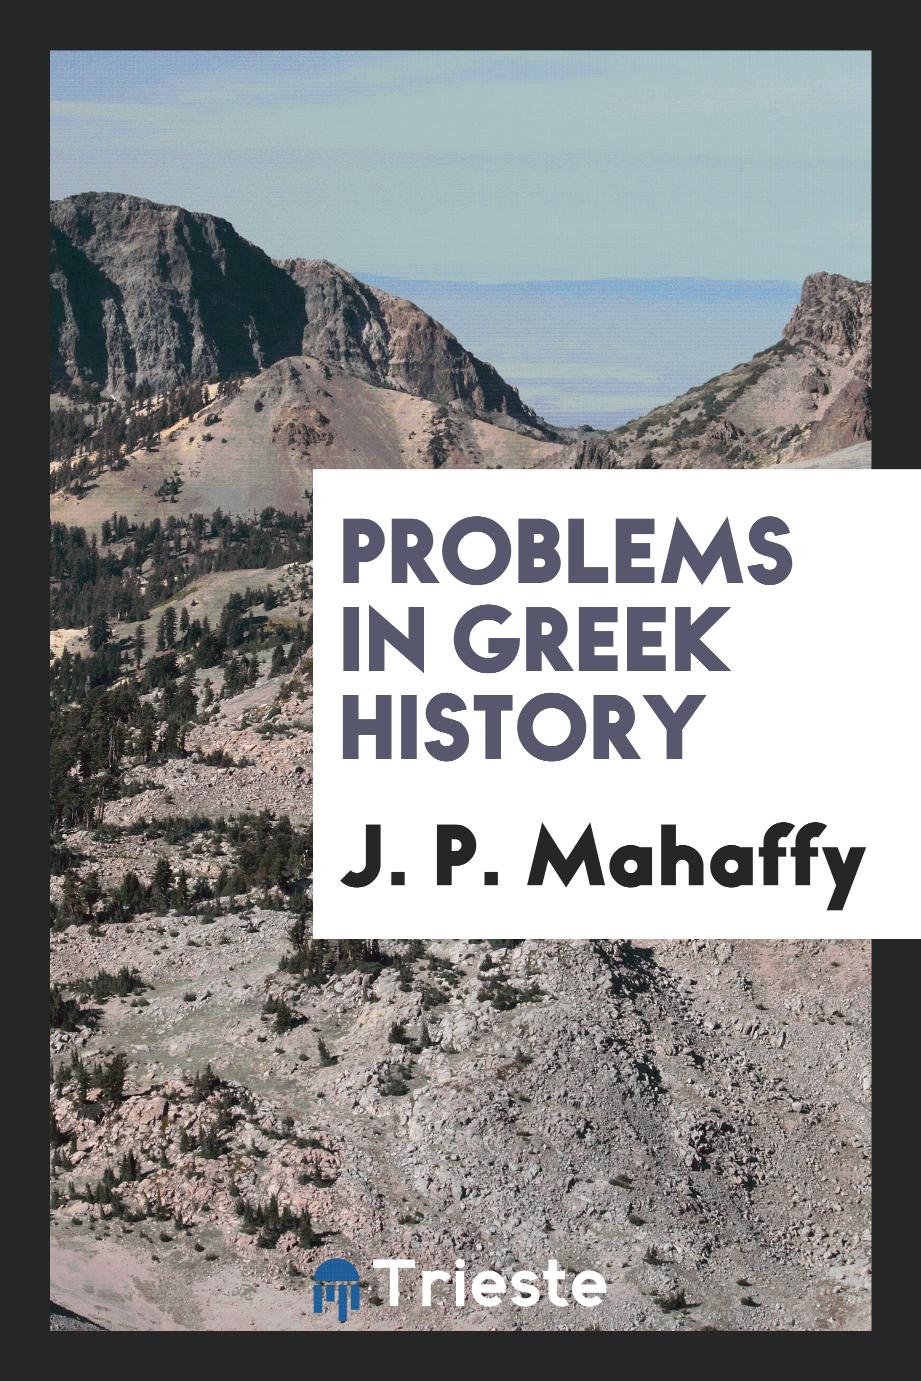 Problems in Greek history